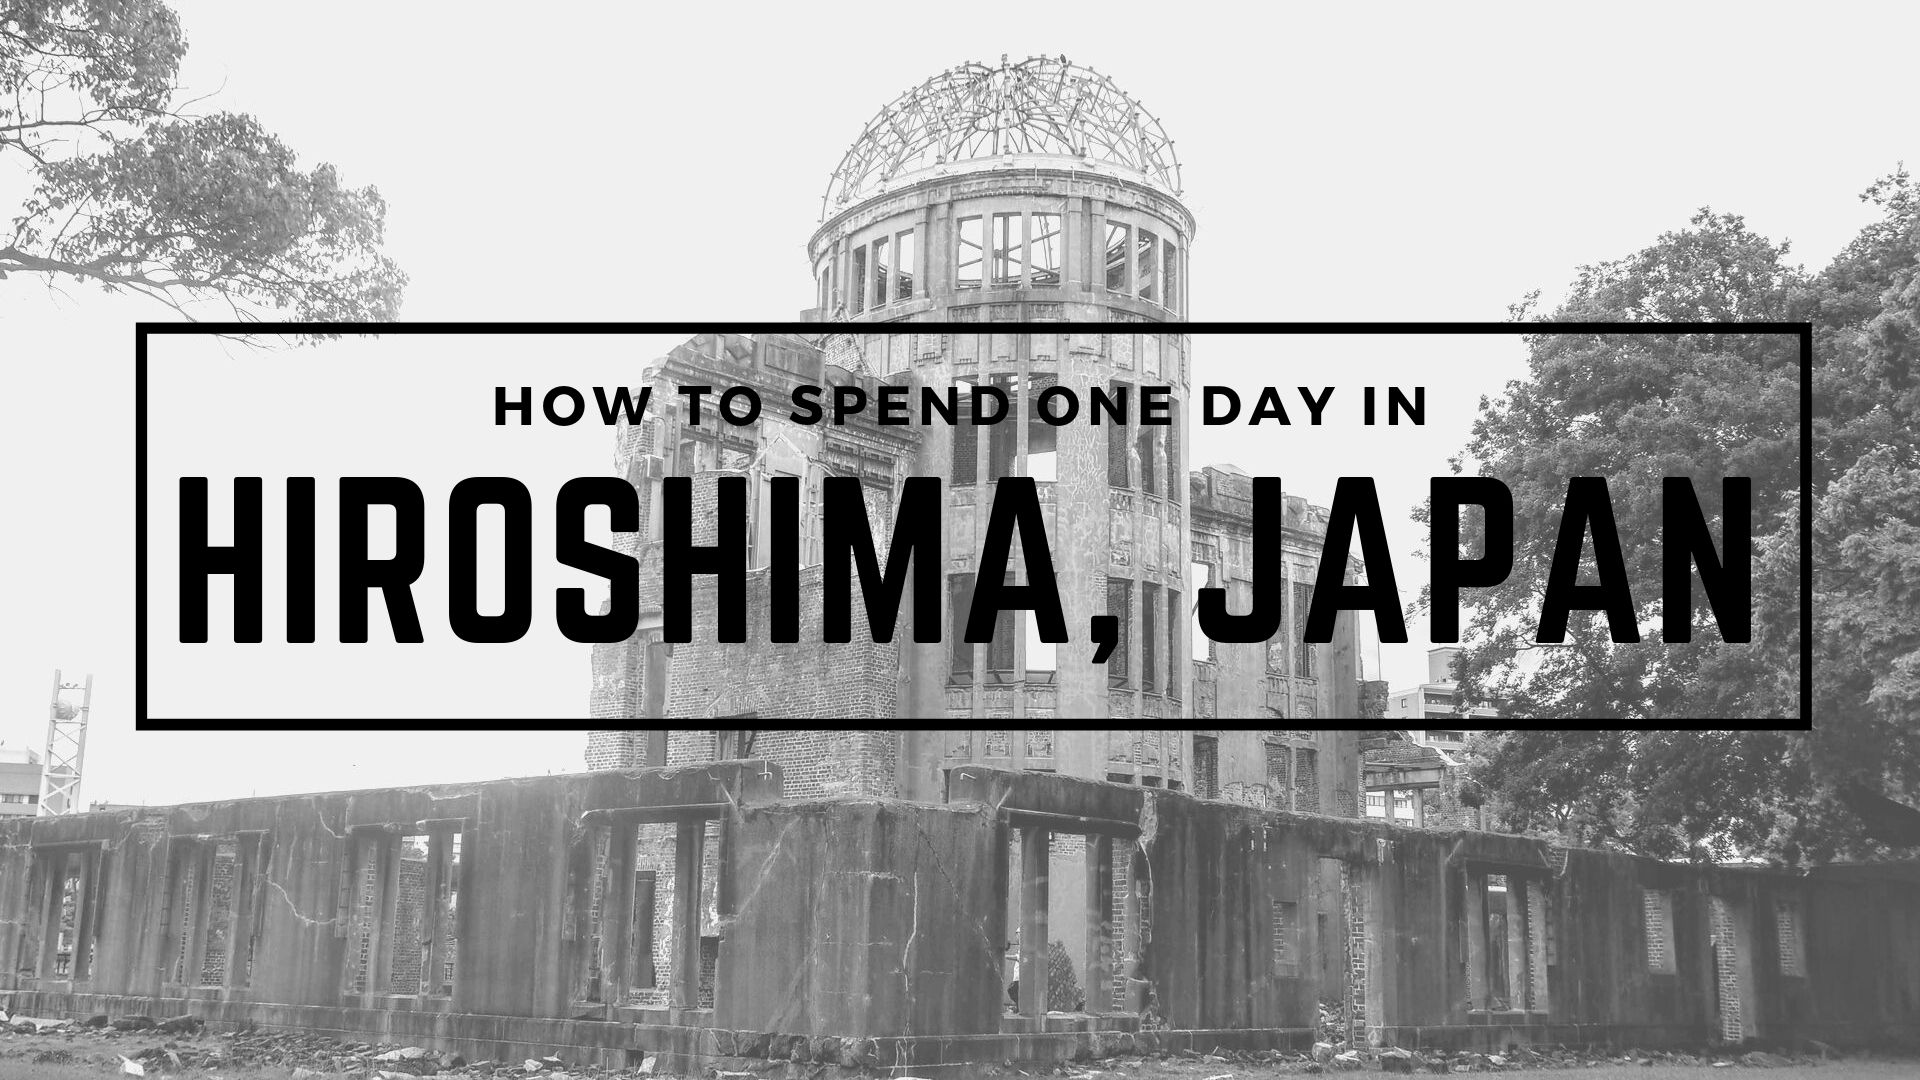 How to Spend One Day in Hiroshima